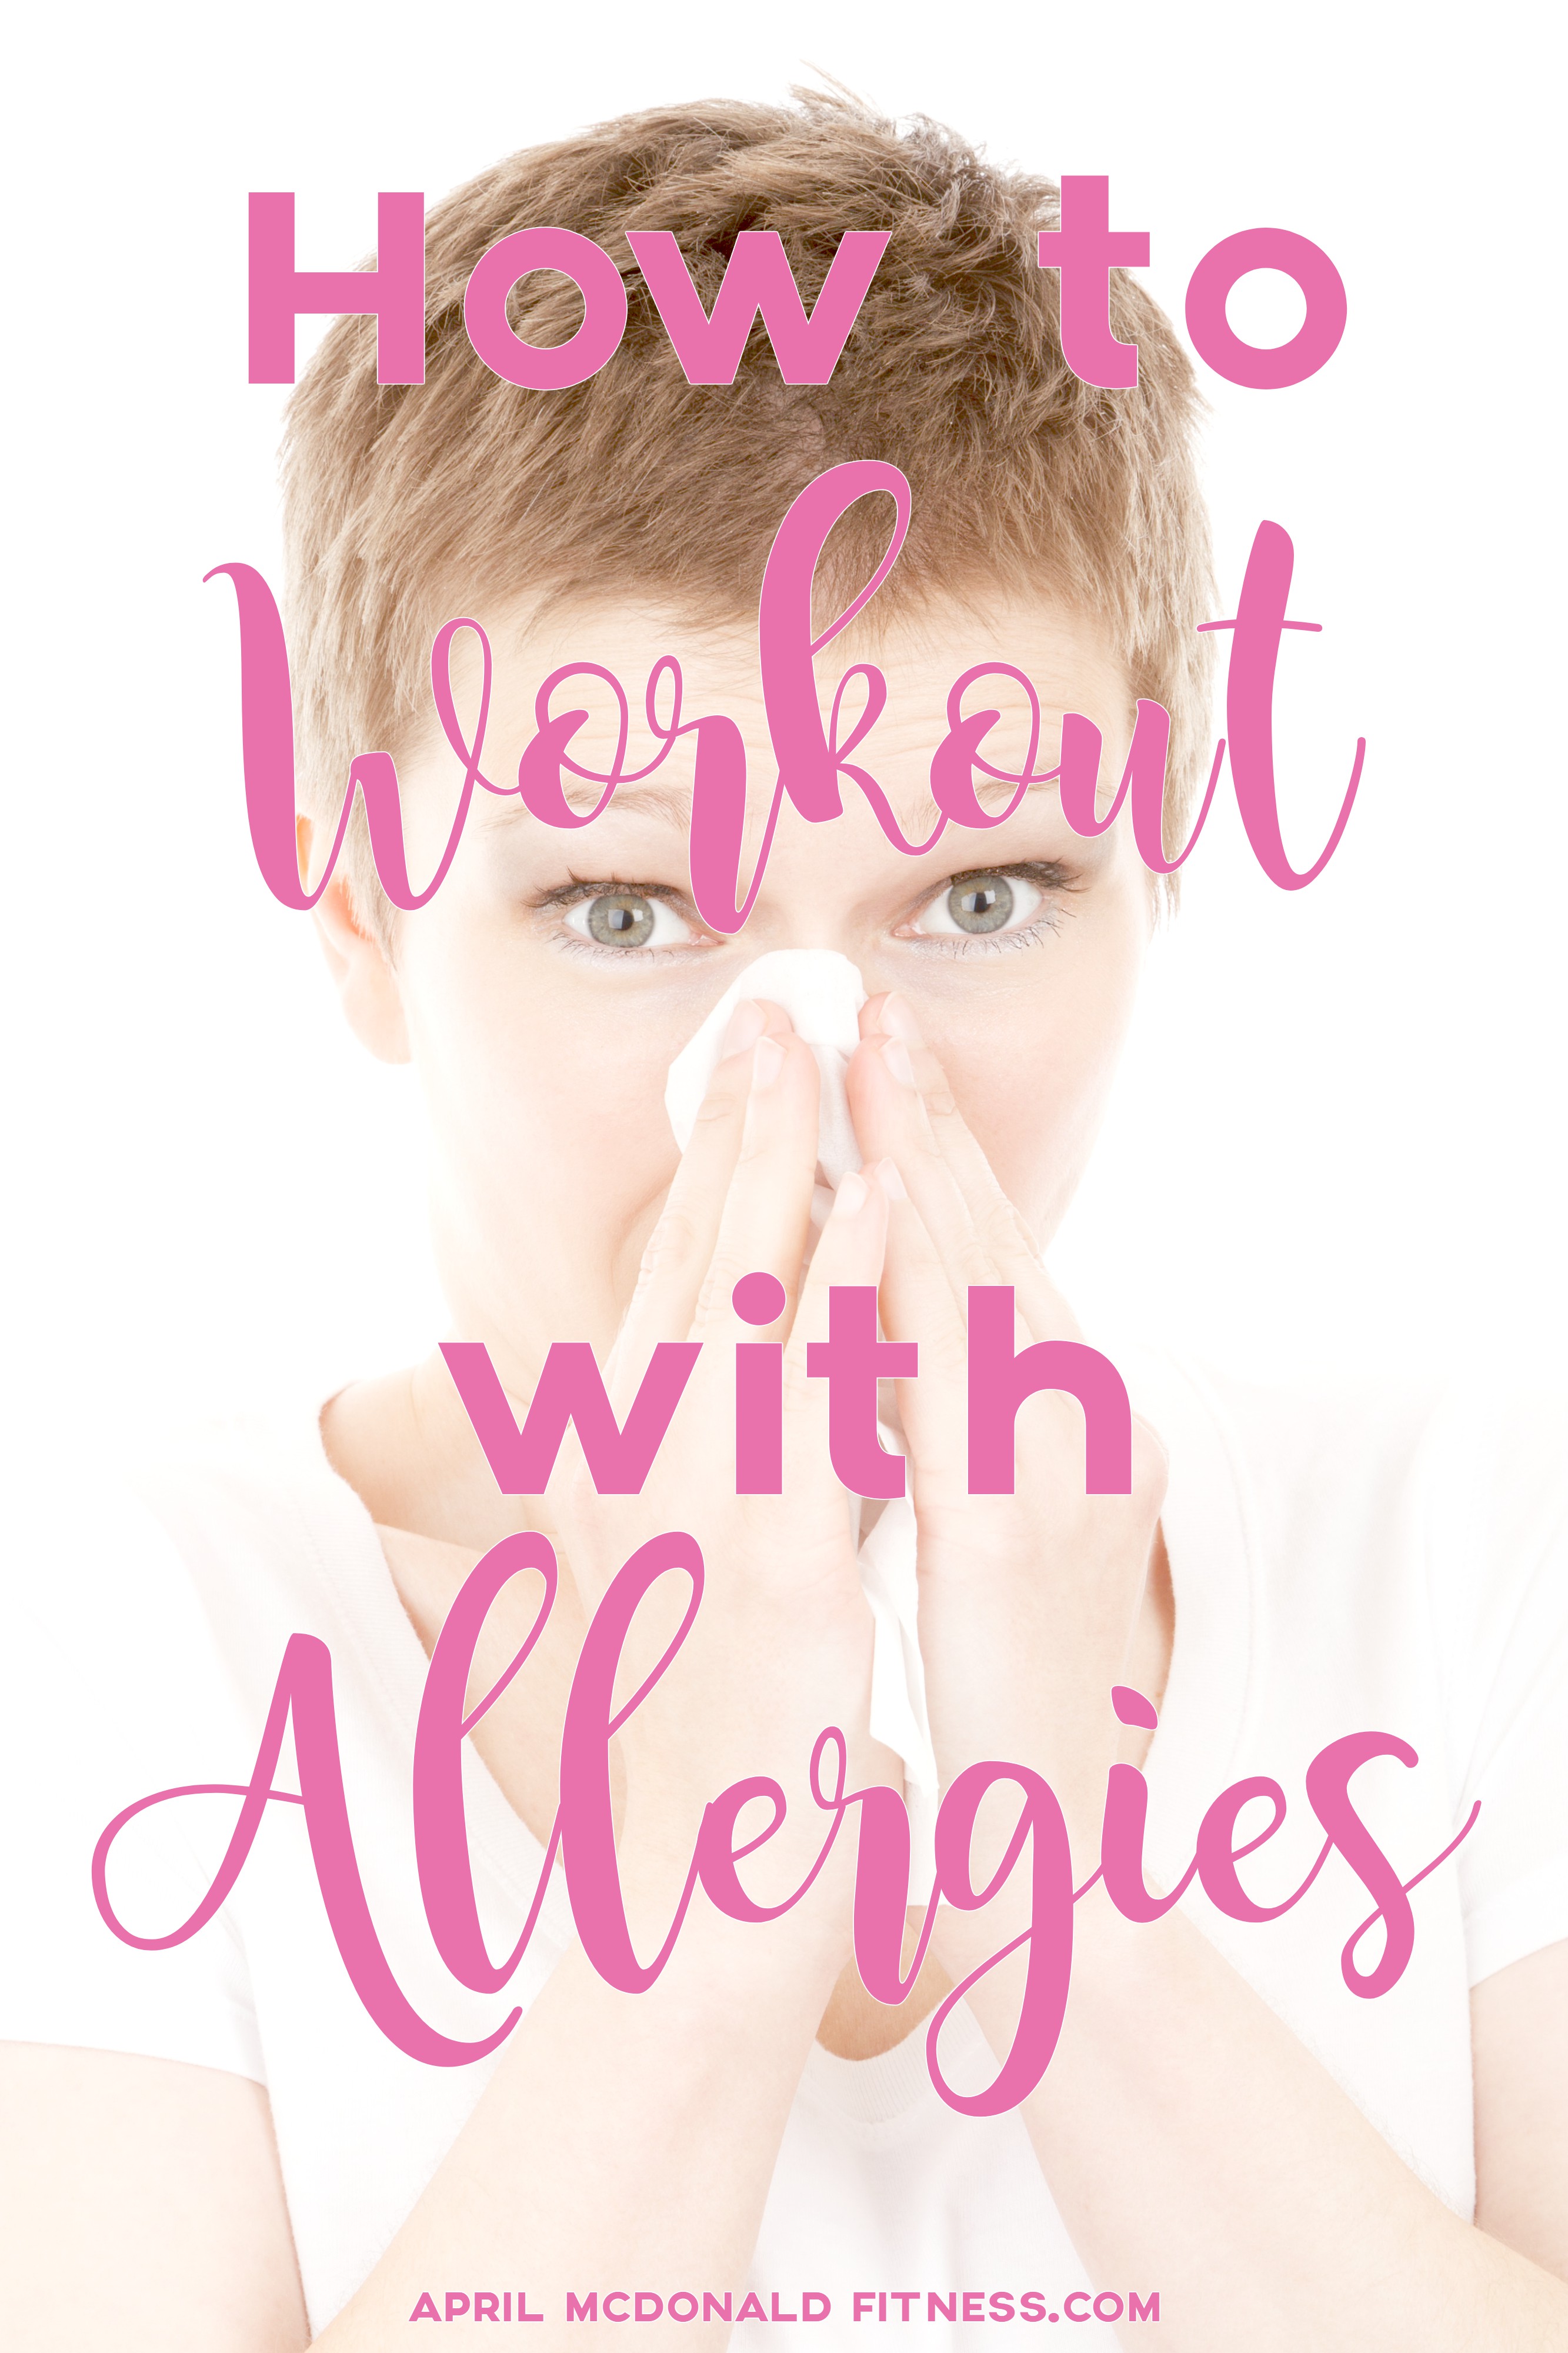 Don't let your allergies control you. You can still workout and overcome them!